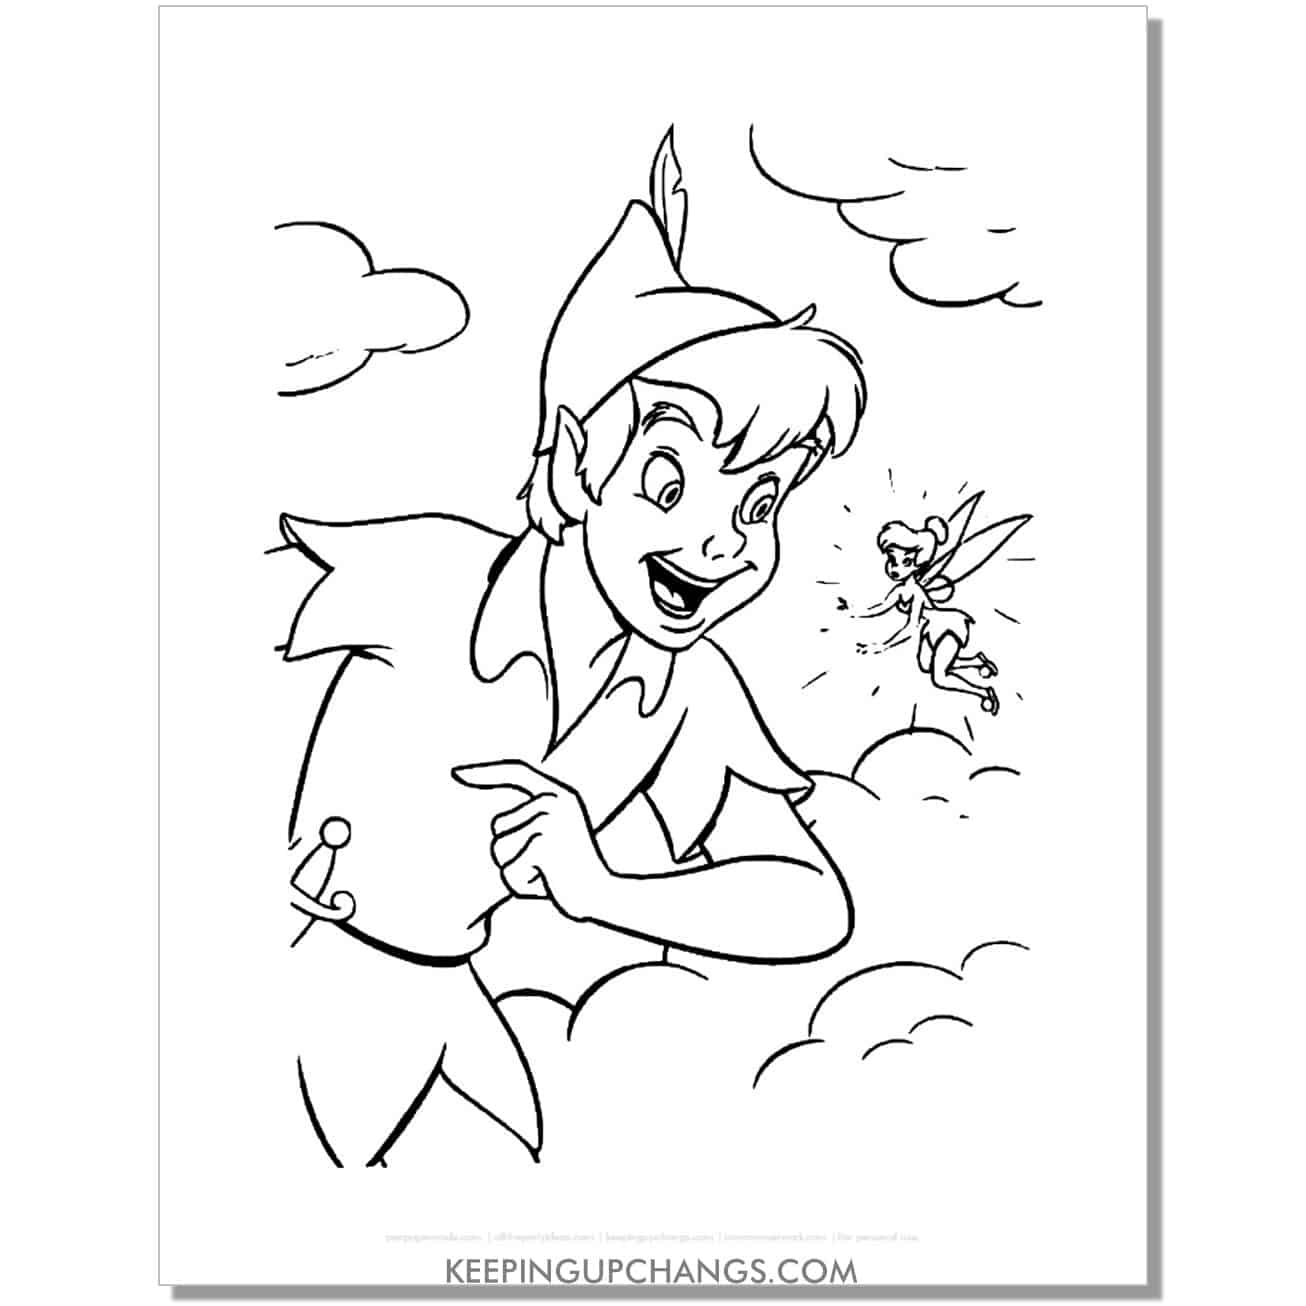 tinkerbell and peter pan among the clouds coloring page, sheet.